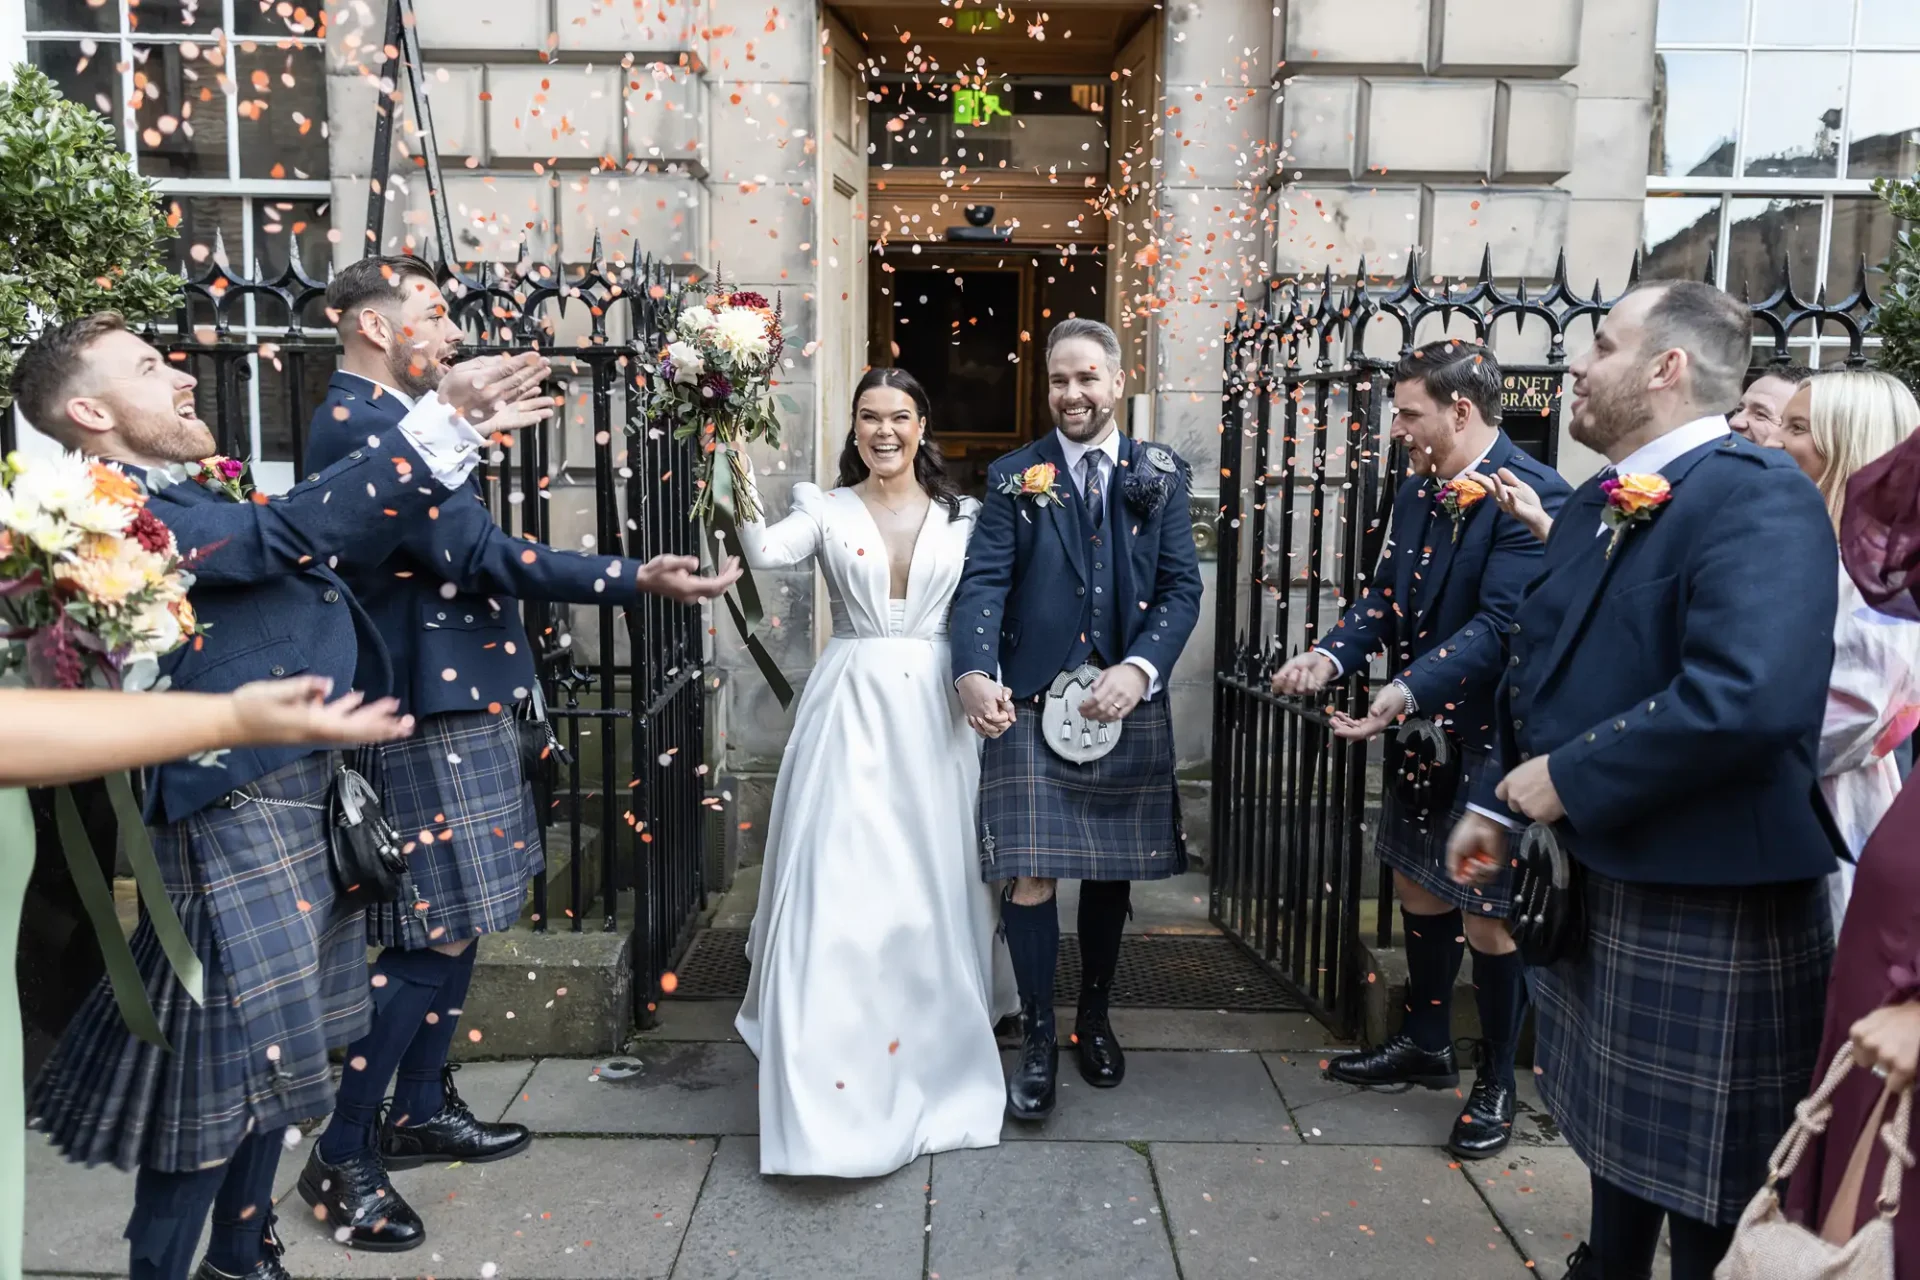 A newlywed couple exits a building, smiling as guests in kilts cheer and throw flower petals.